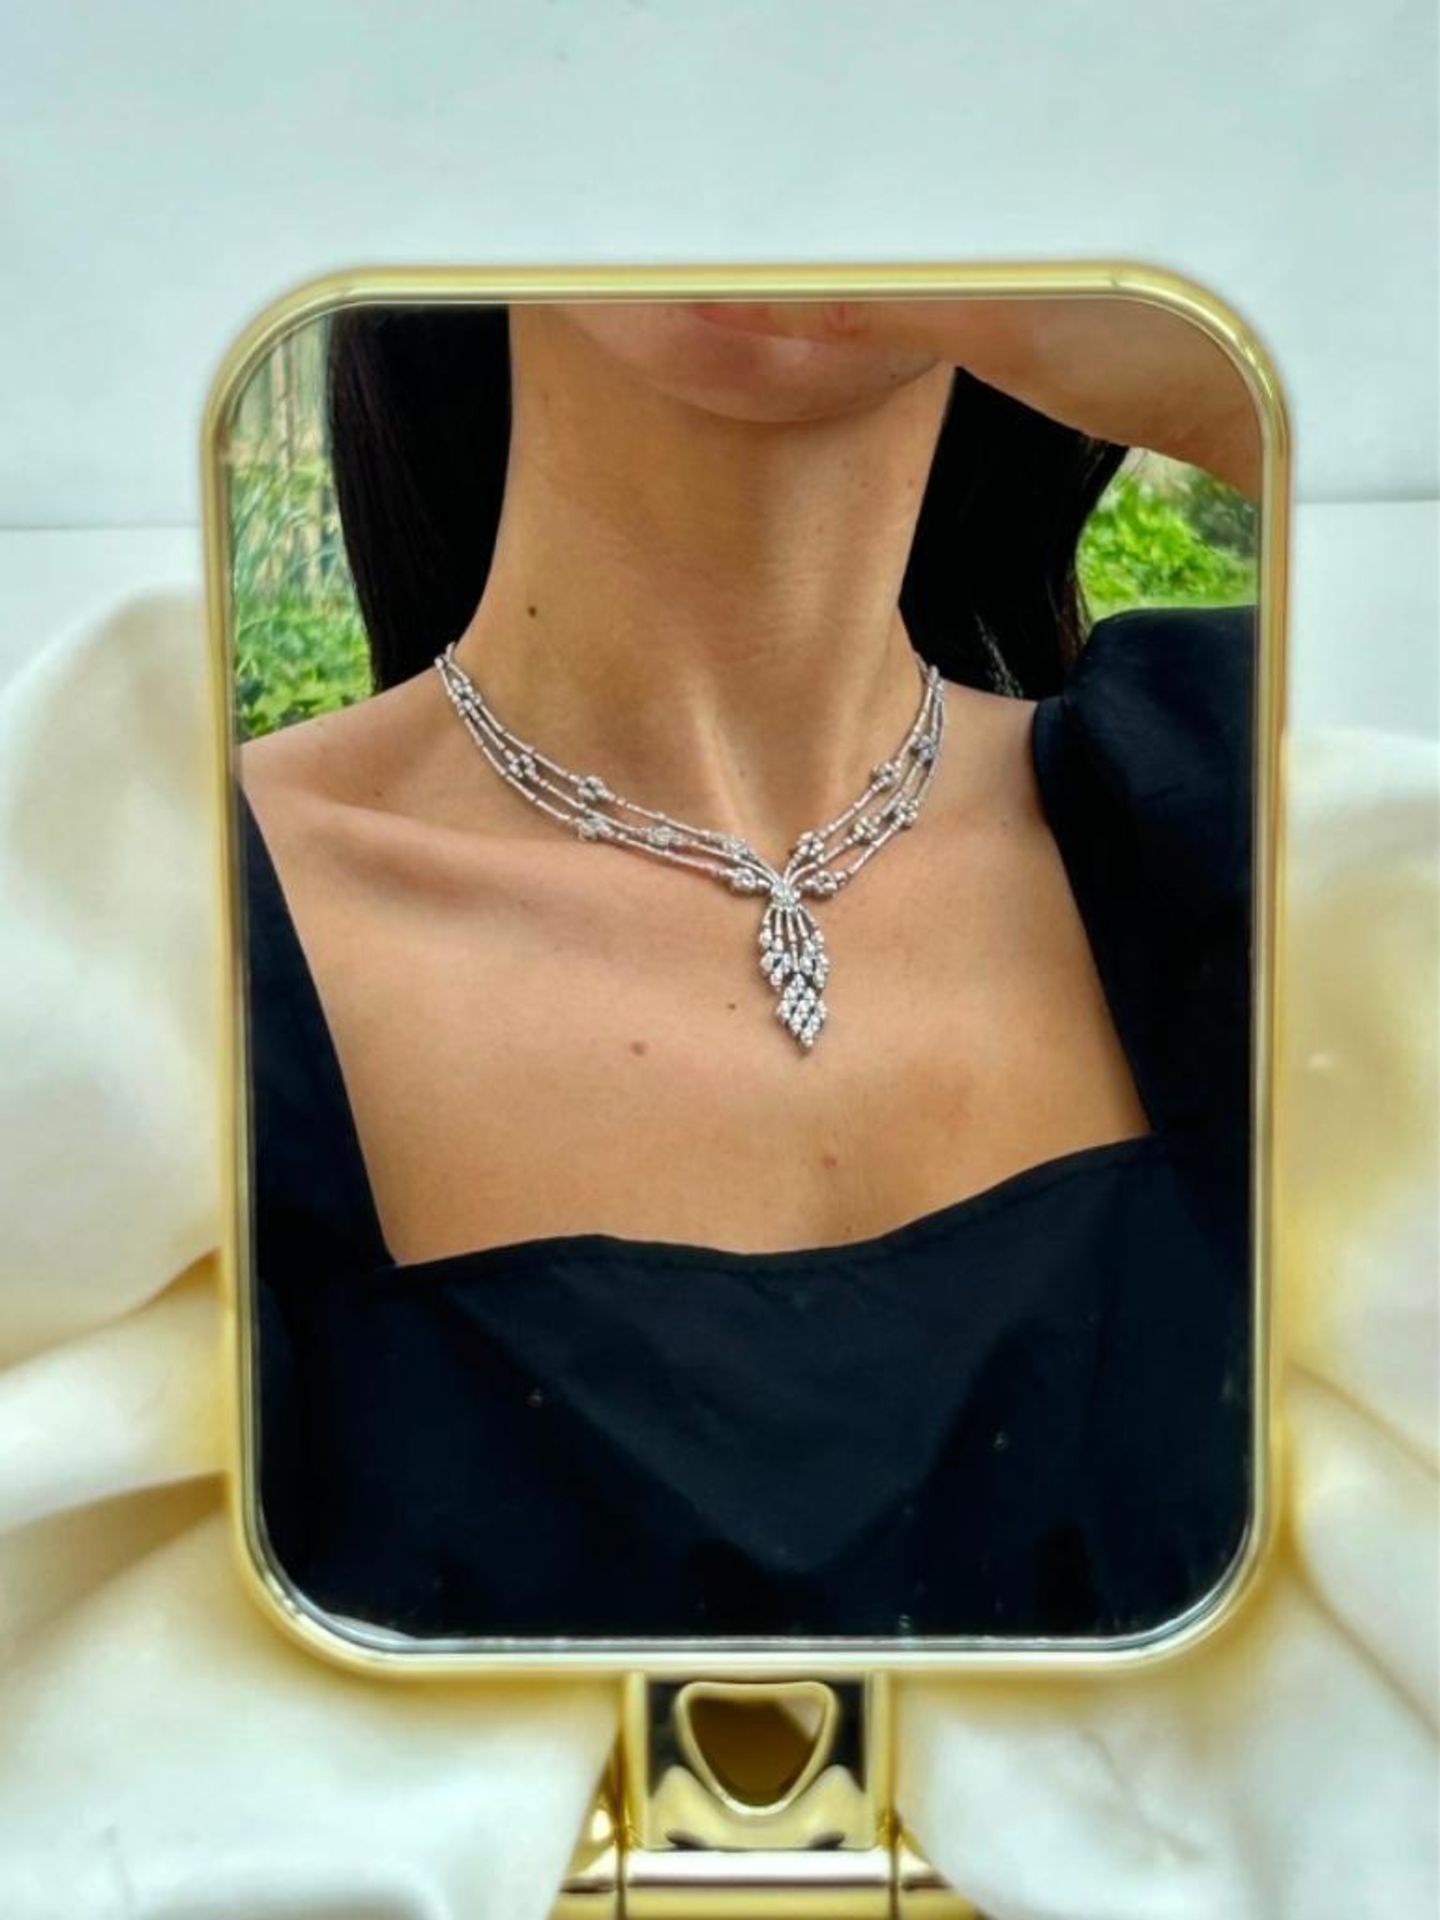 18ct White Gold and 10 Carat Plus Diamond Necklace - Image 3 of 14